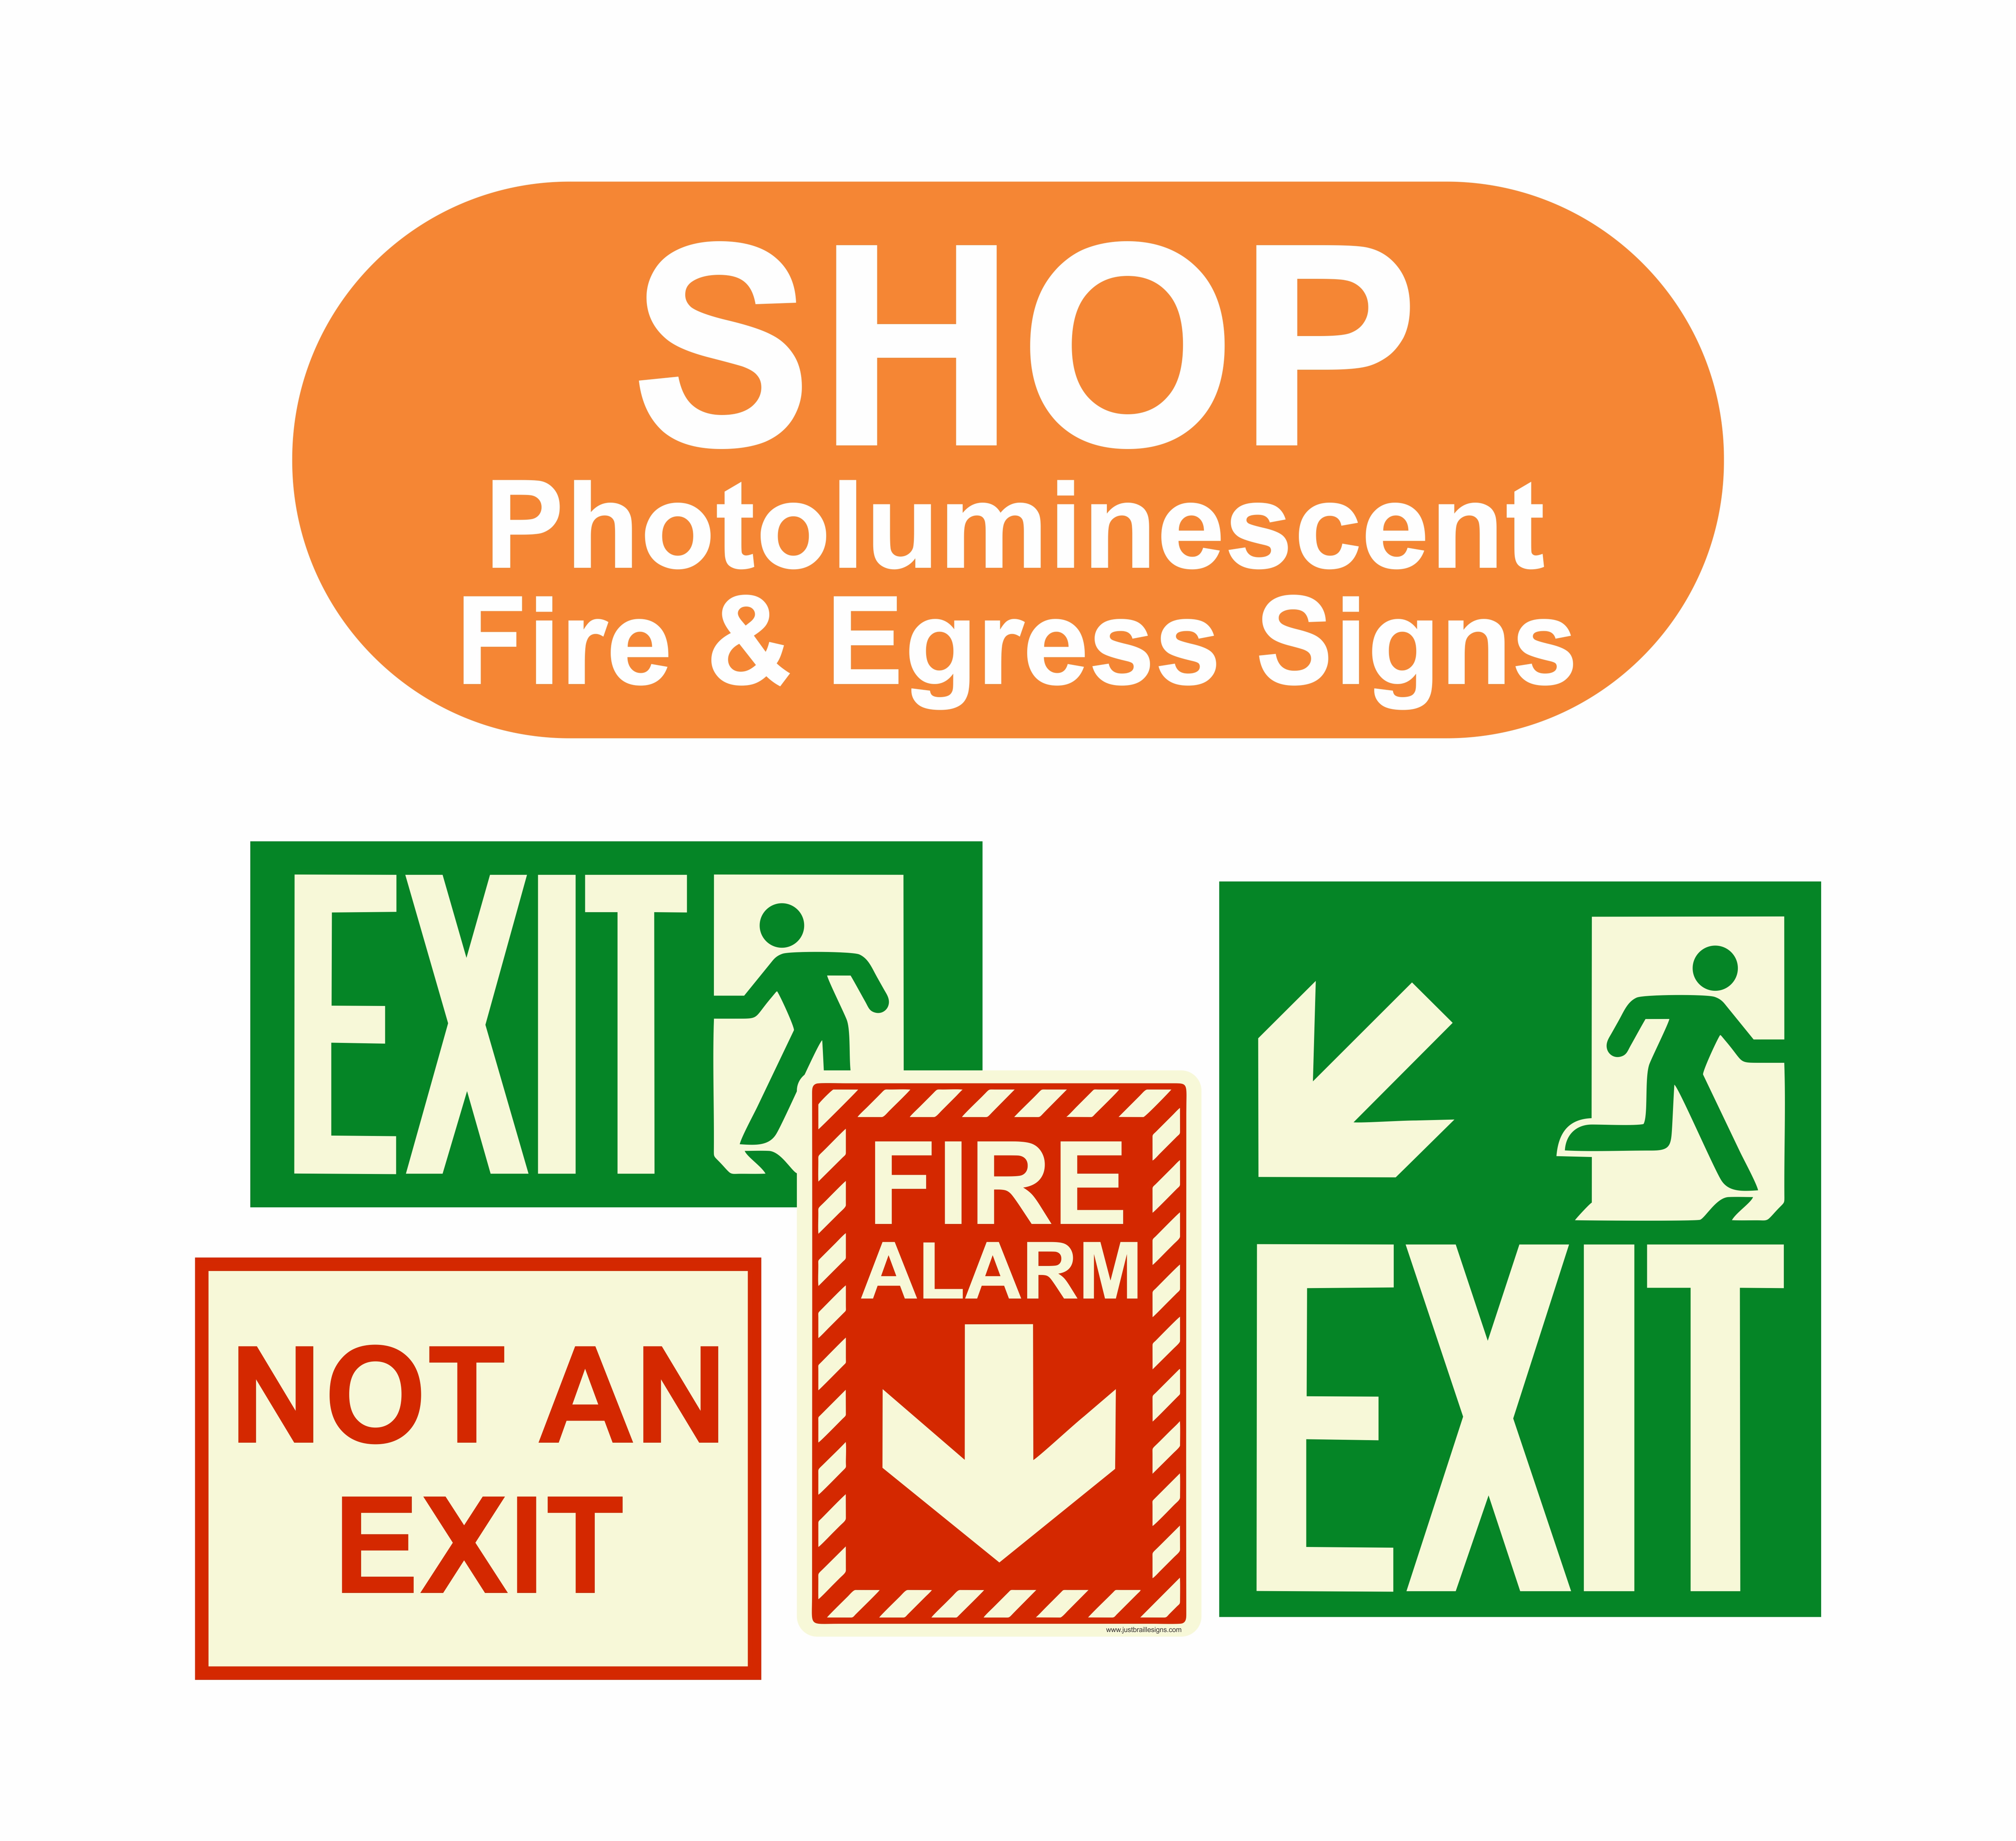 Photoluminescent egress and fire safety signs